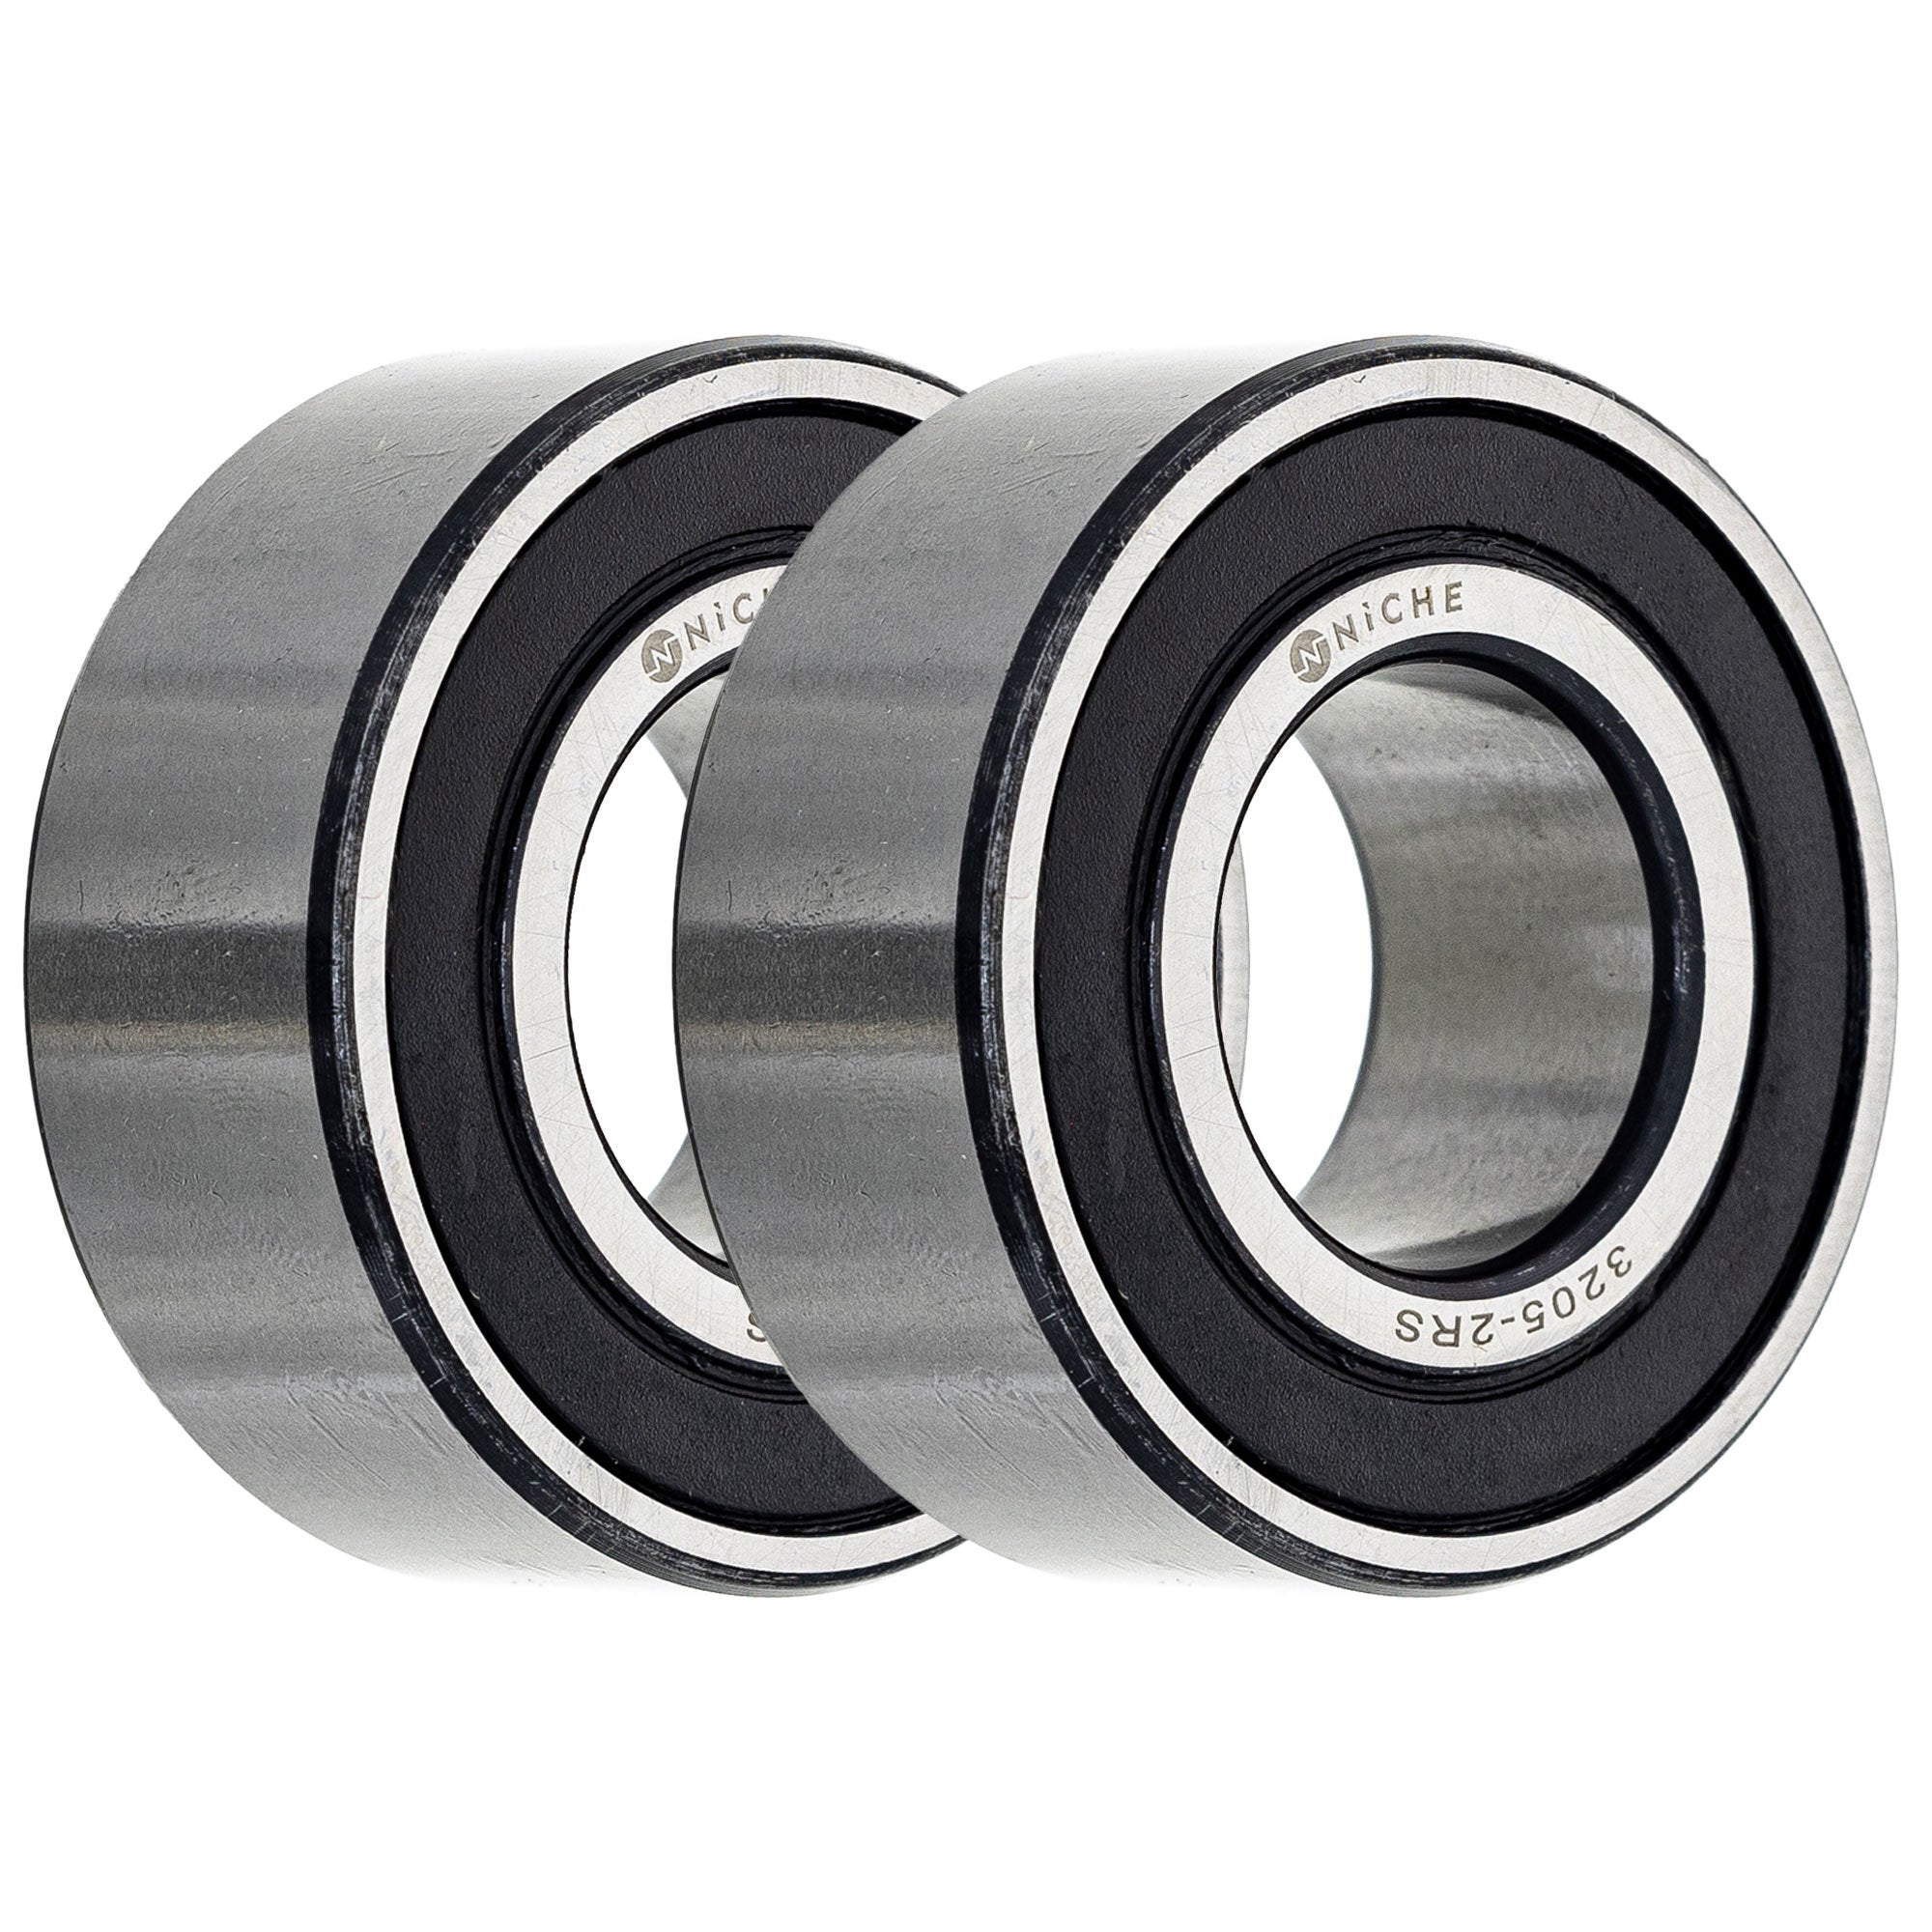 Double Row, Angular Contact, Ball Bearing Pack of 2 2-Pack for zOTHER ST1300A ST1300 NICHE 519-CBB2284R